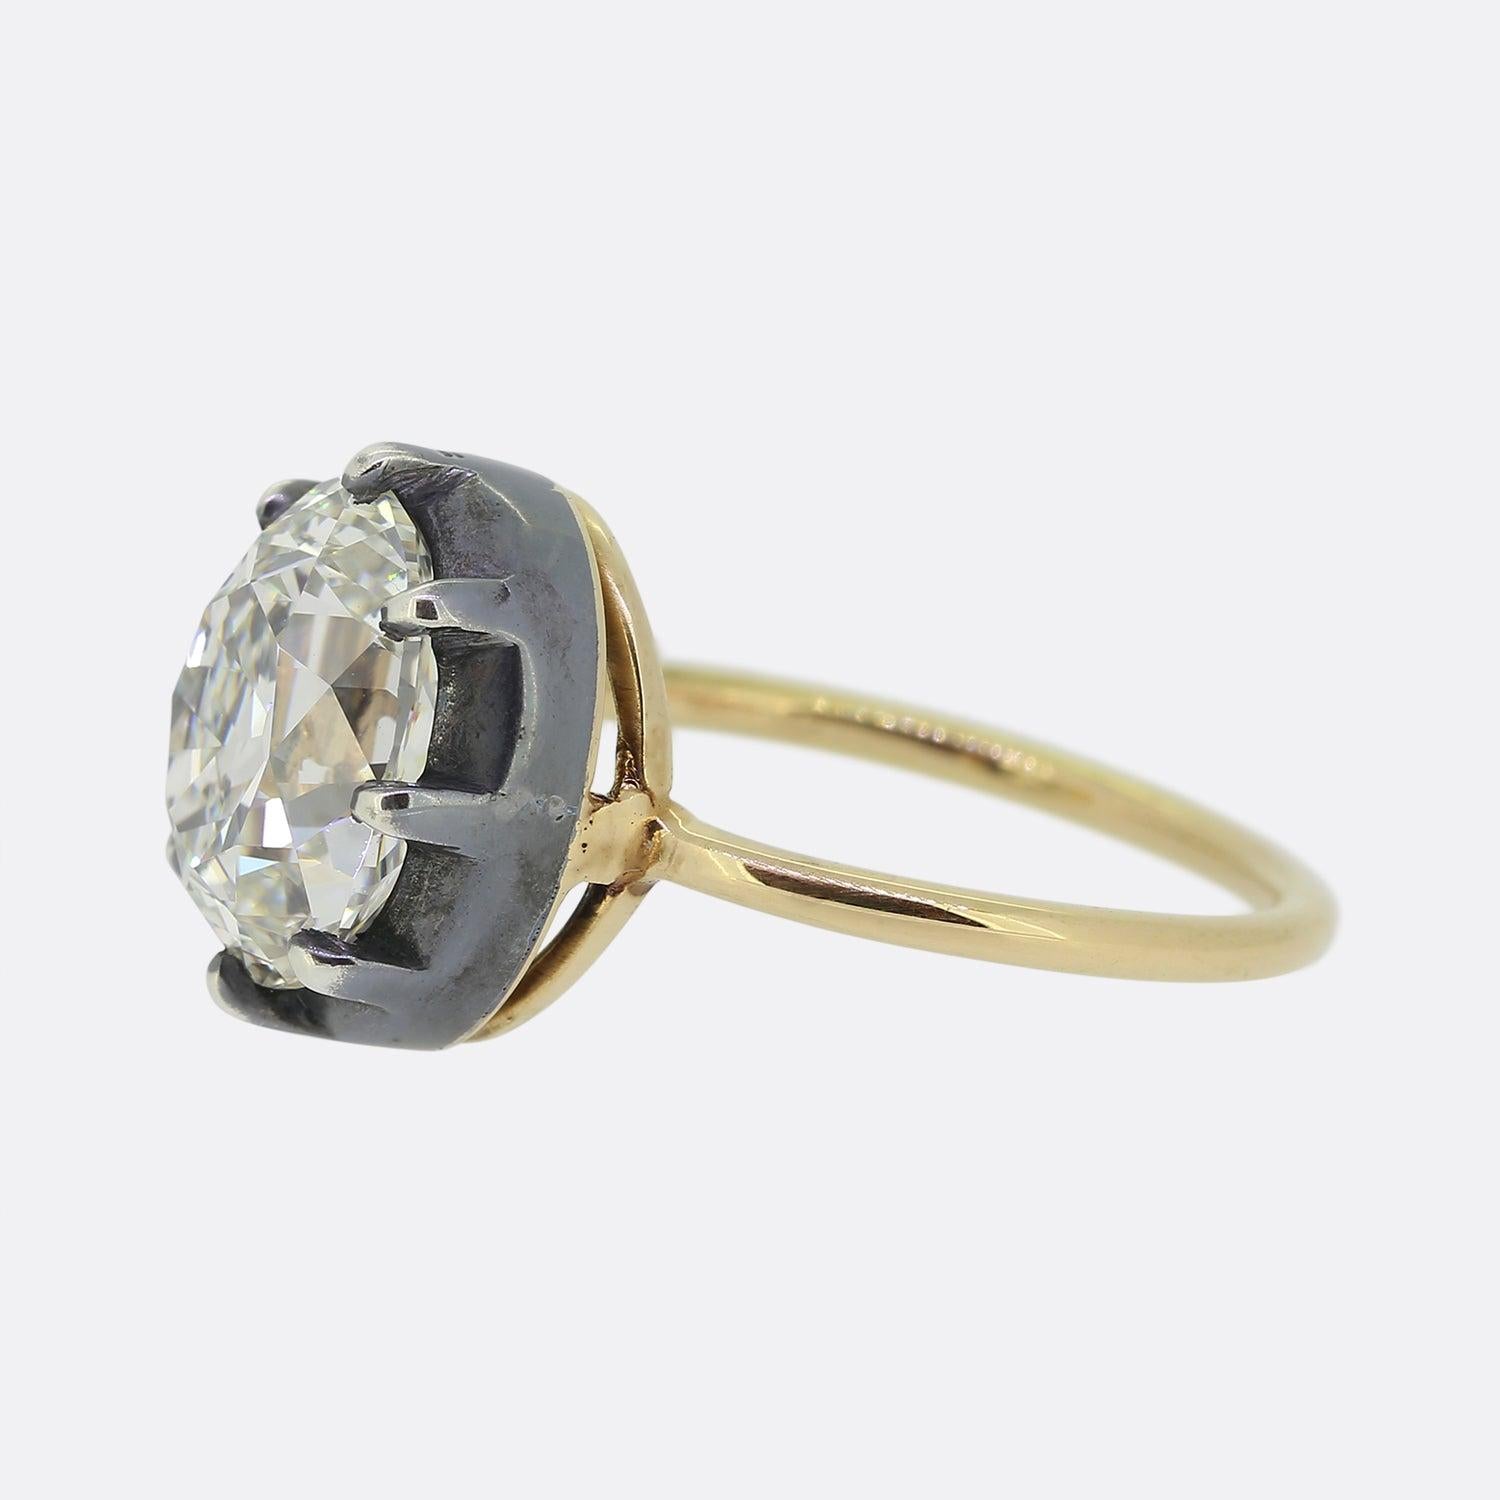 Here we have a marvellous Georgian style diamond solitaire ring. Set upon a thin 18ct yellow gold band, the face of the piece presents a single oval faceted old cut diamond which has been set in a silver cut collet setting with a wide exposed